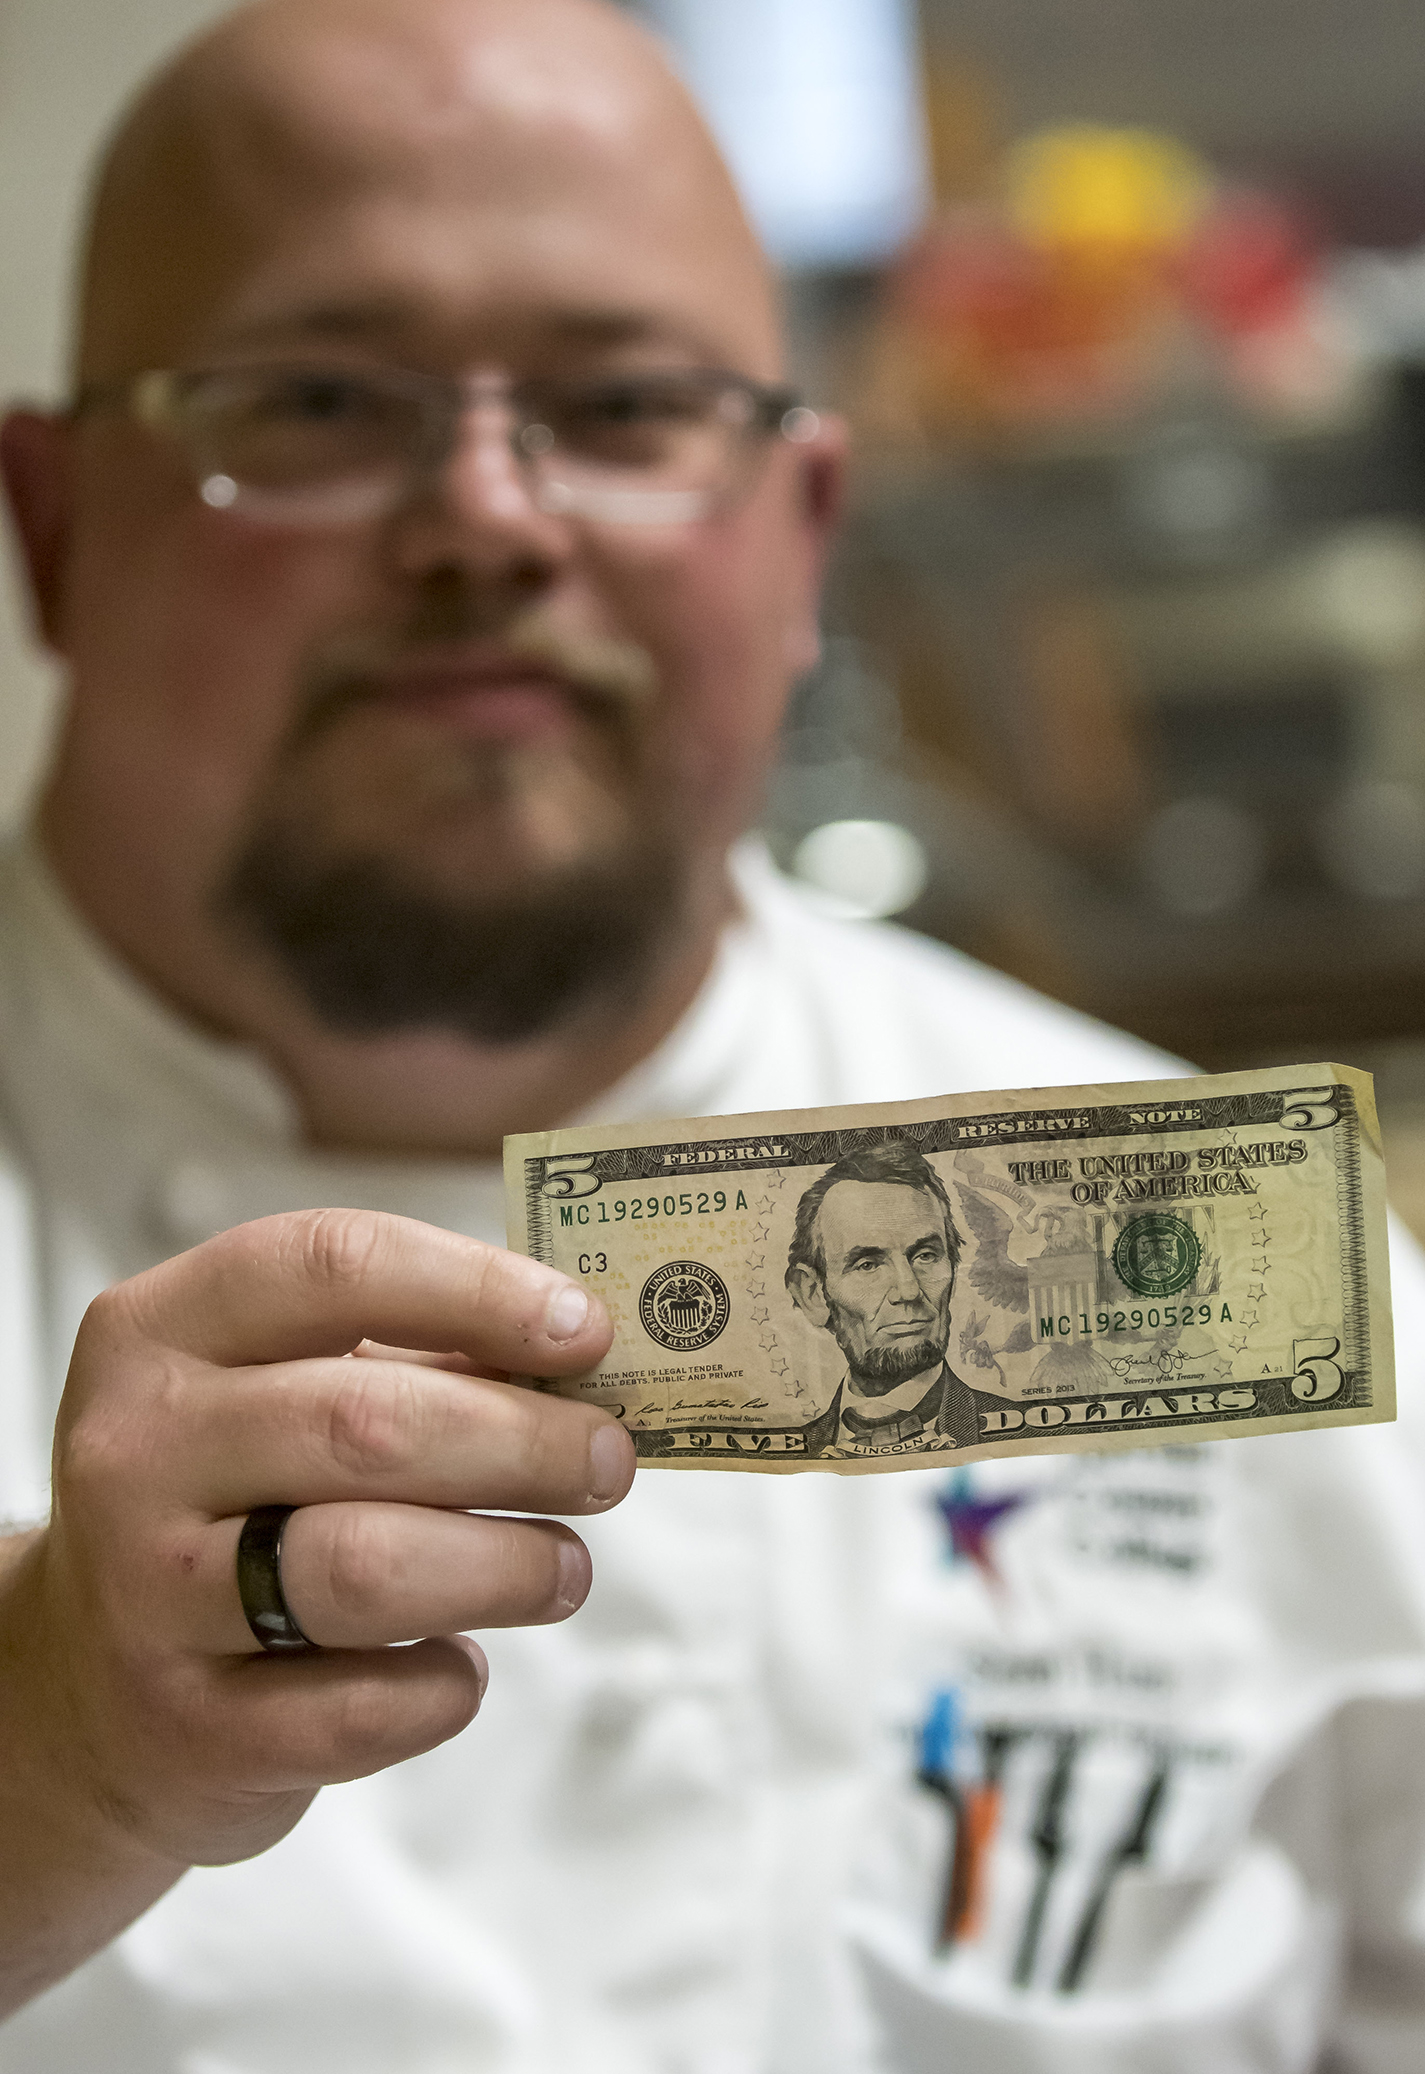 SE culinary arts instructional assistant Sean Hunt holds a $5 bill, which will buy a lunch prepared by the program.